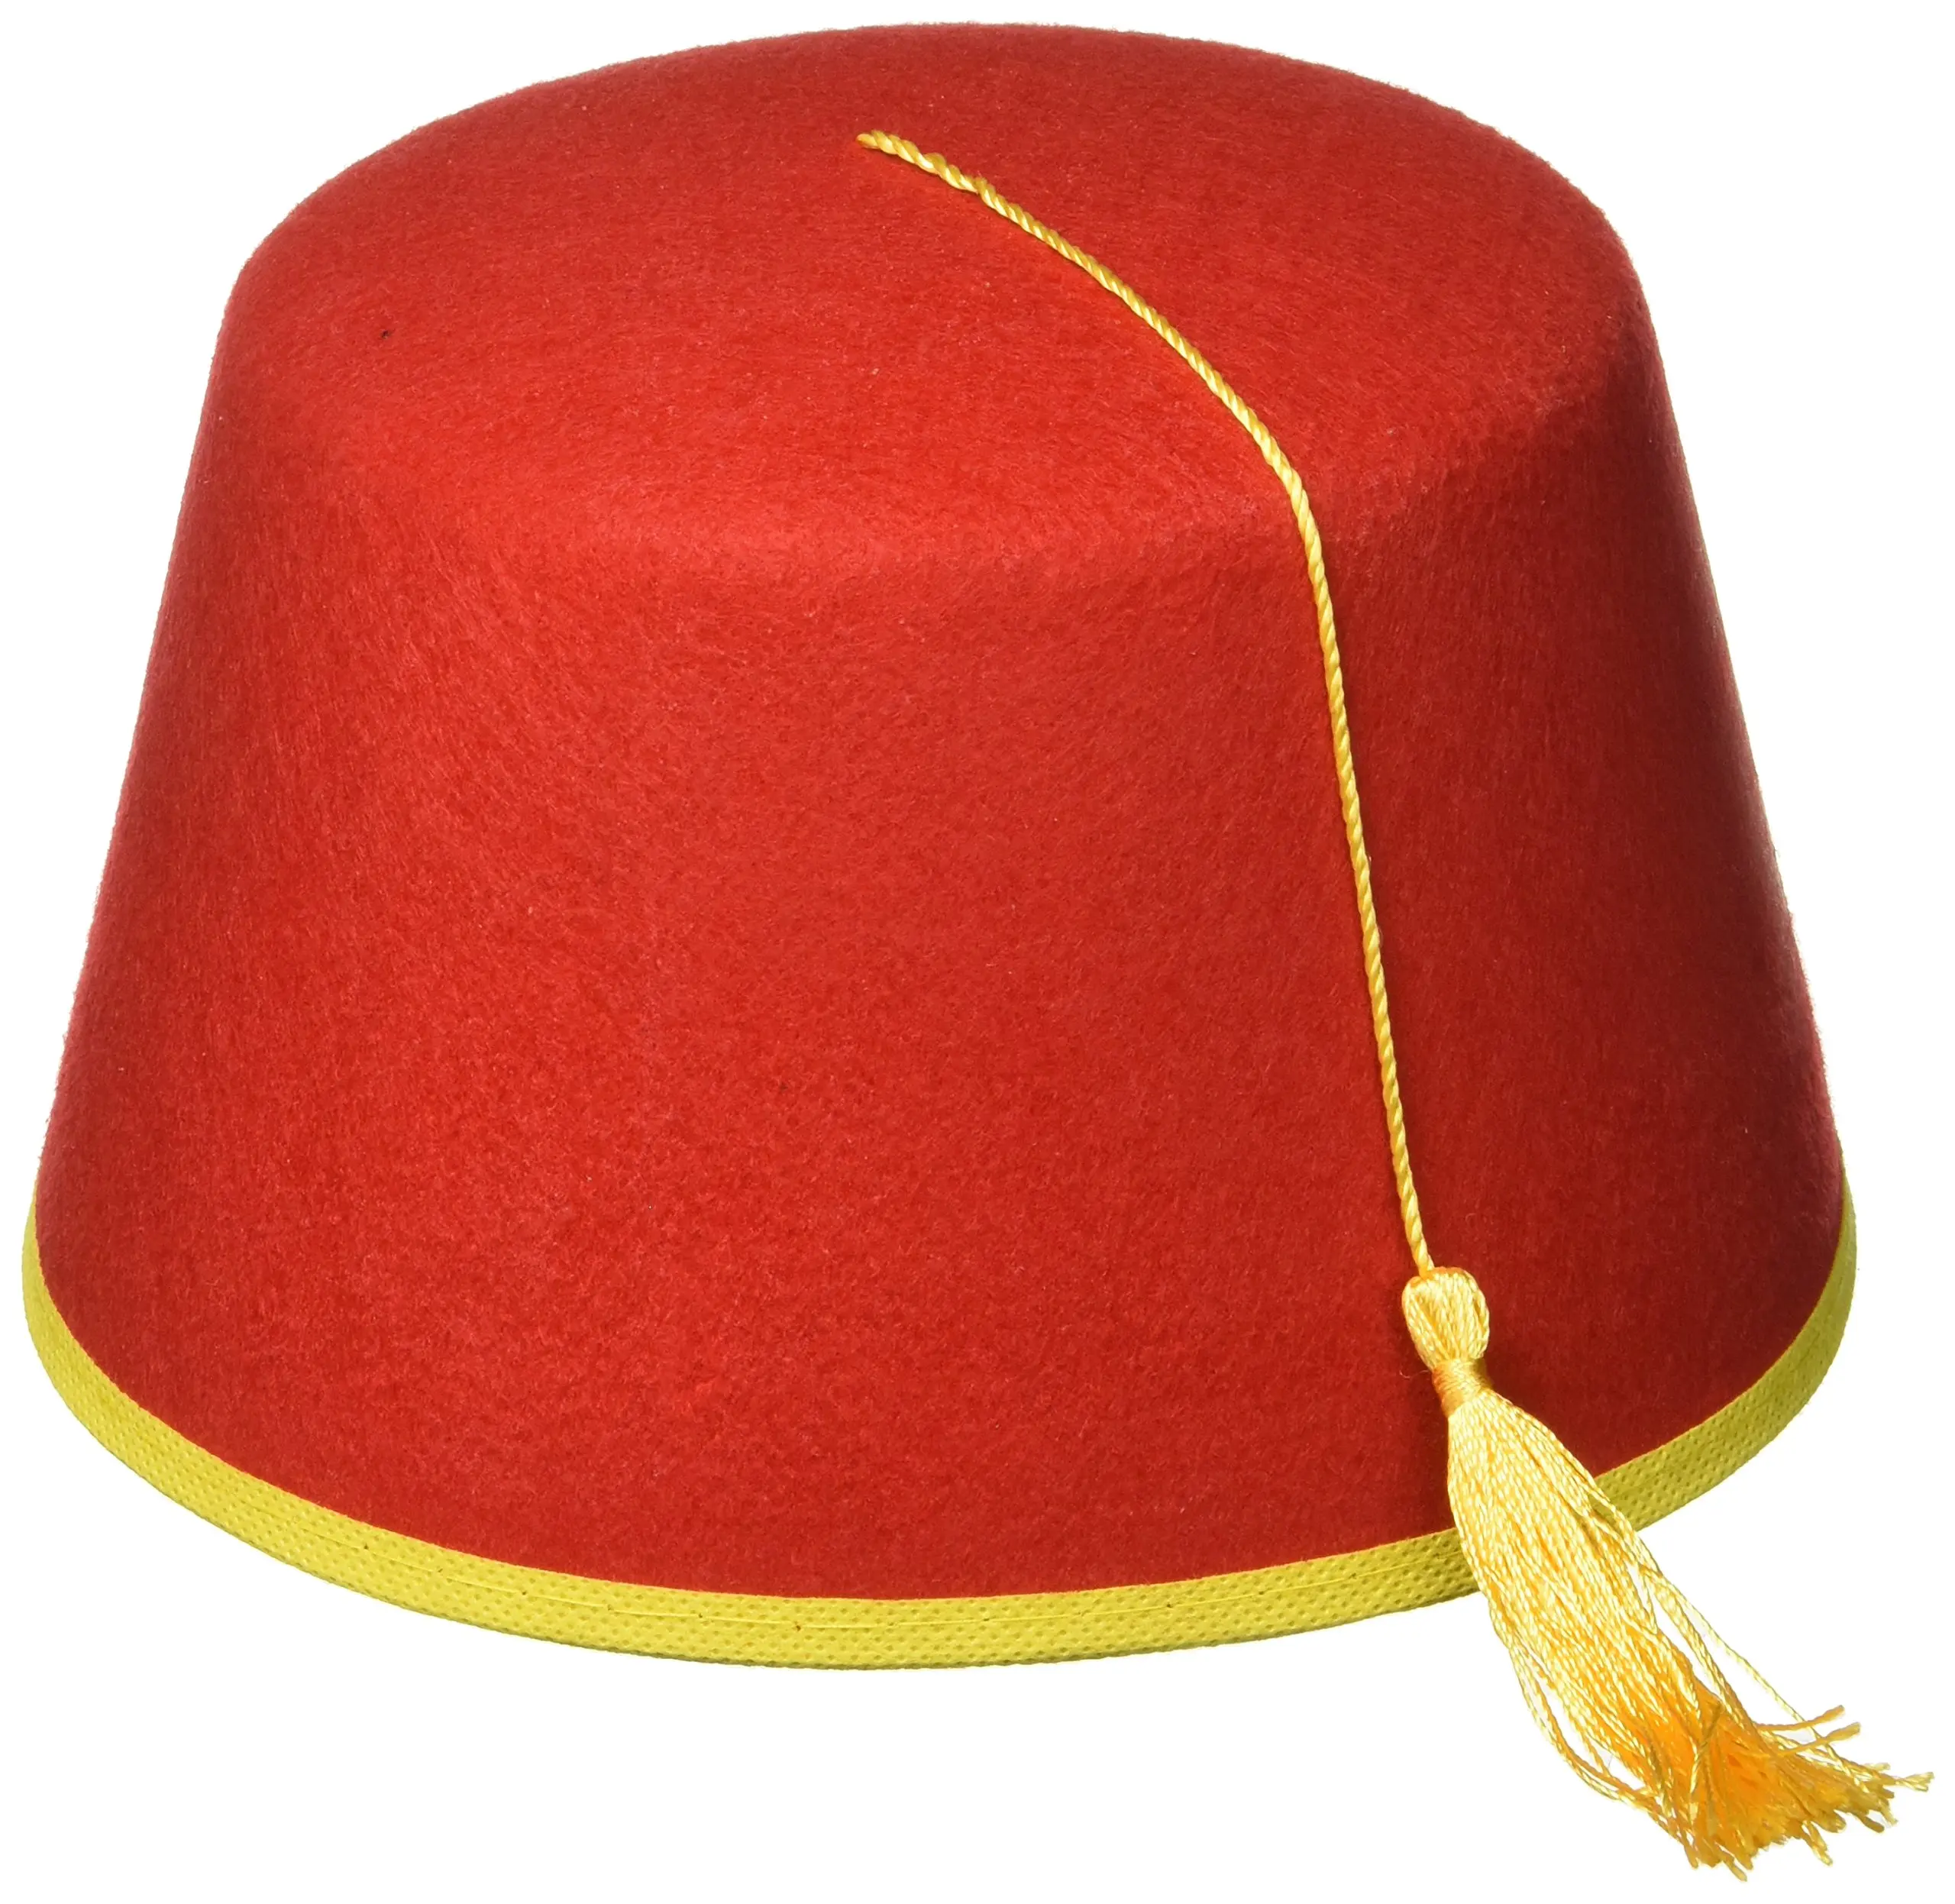 fez hat meaning